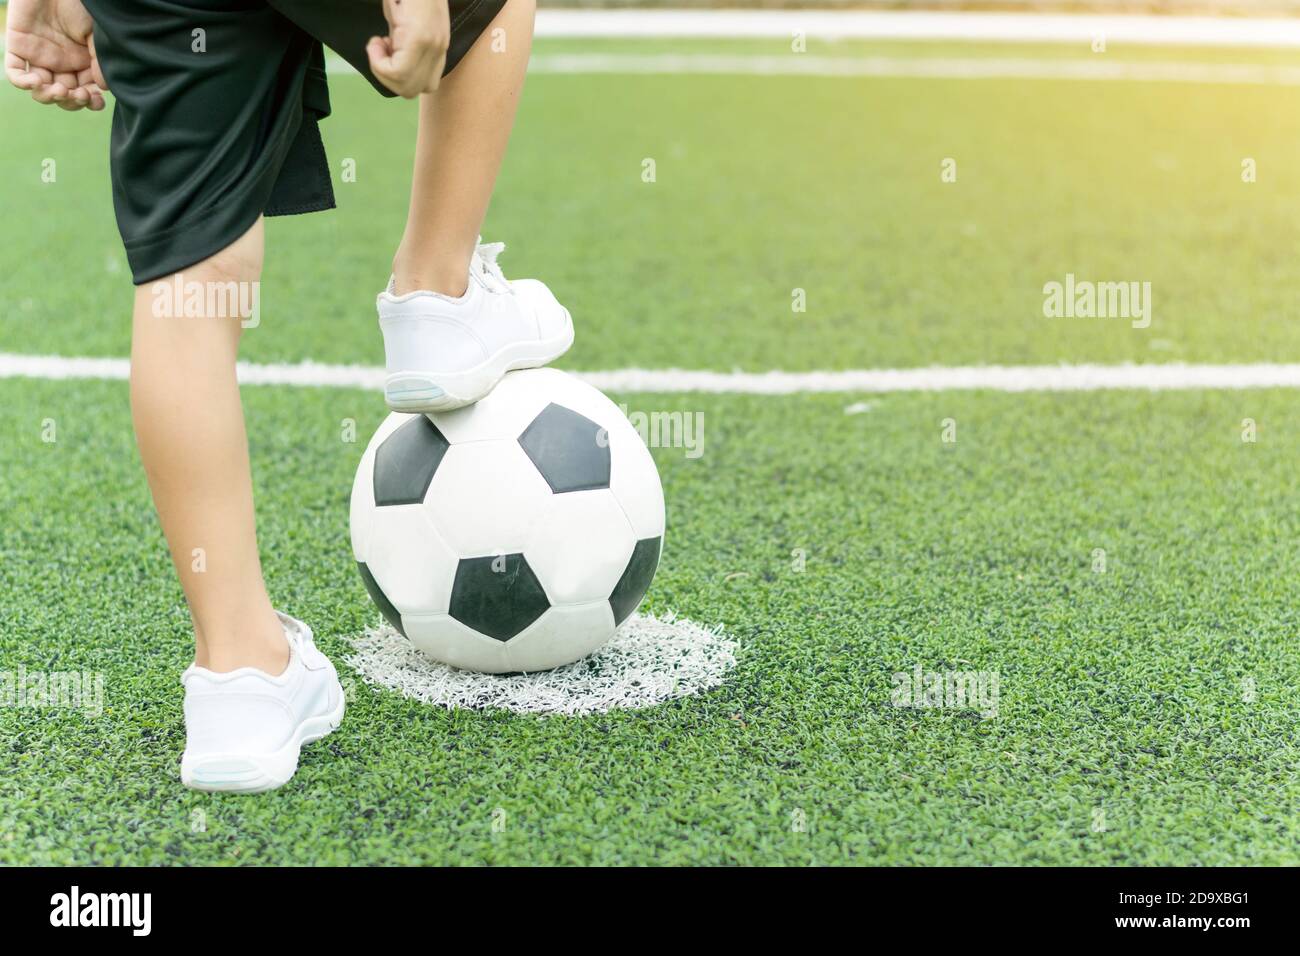 Feet of a boy wearing white sneakers stepping on a soccer ball in the middle of the football field. Stock Photo